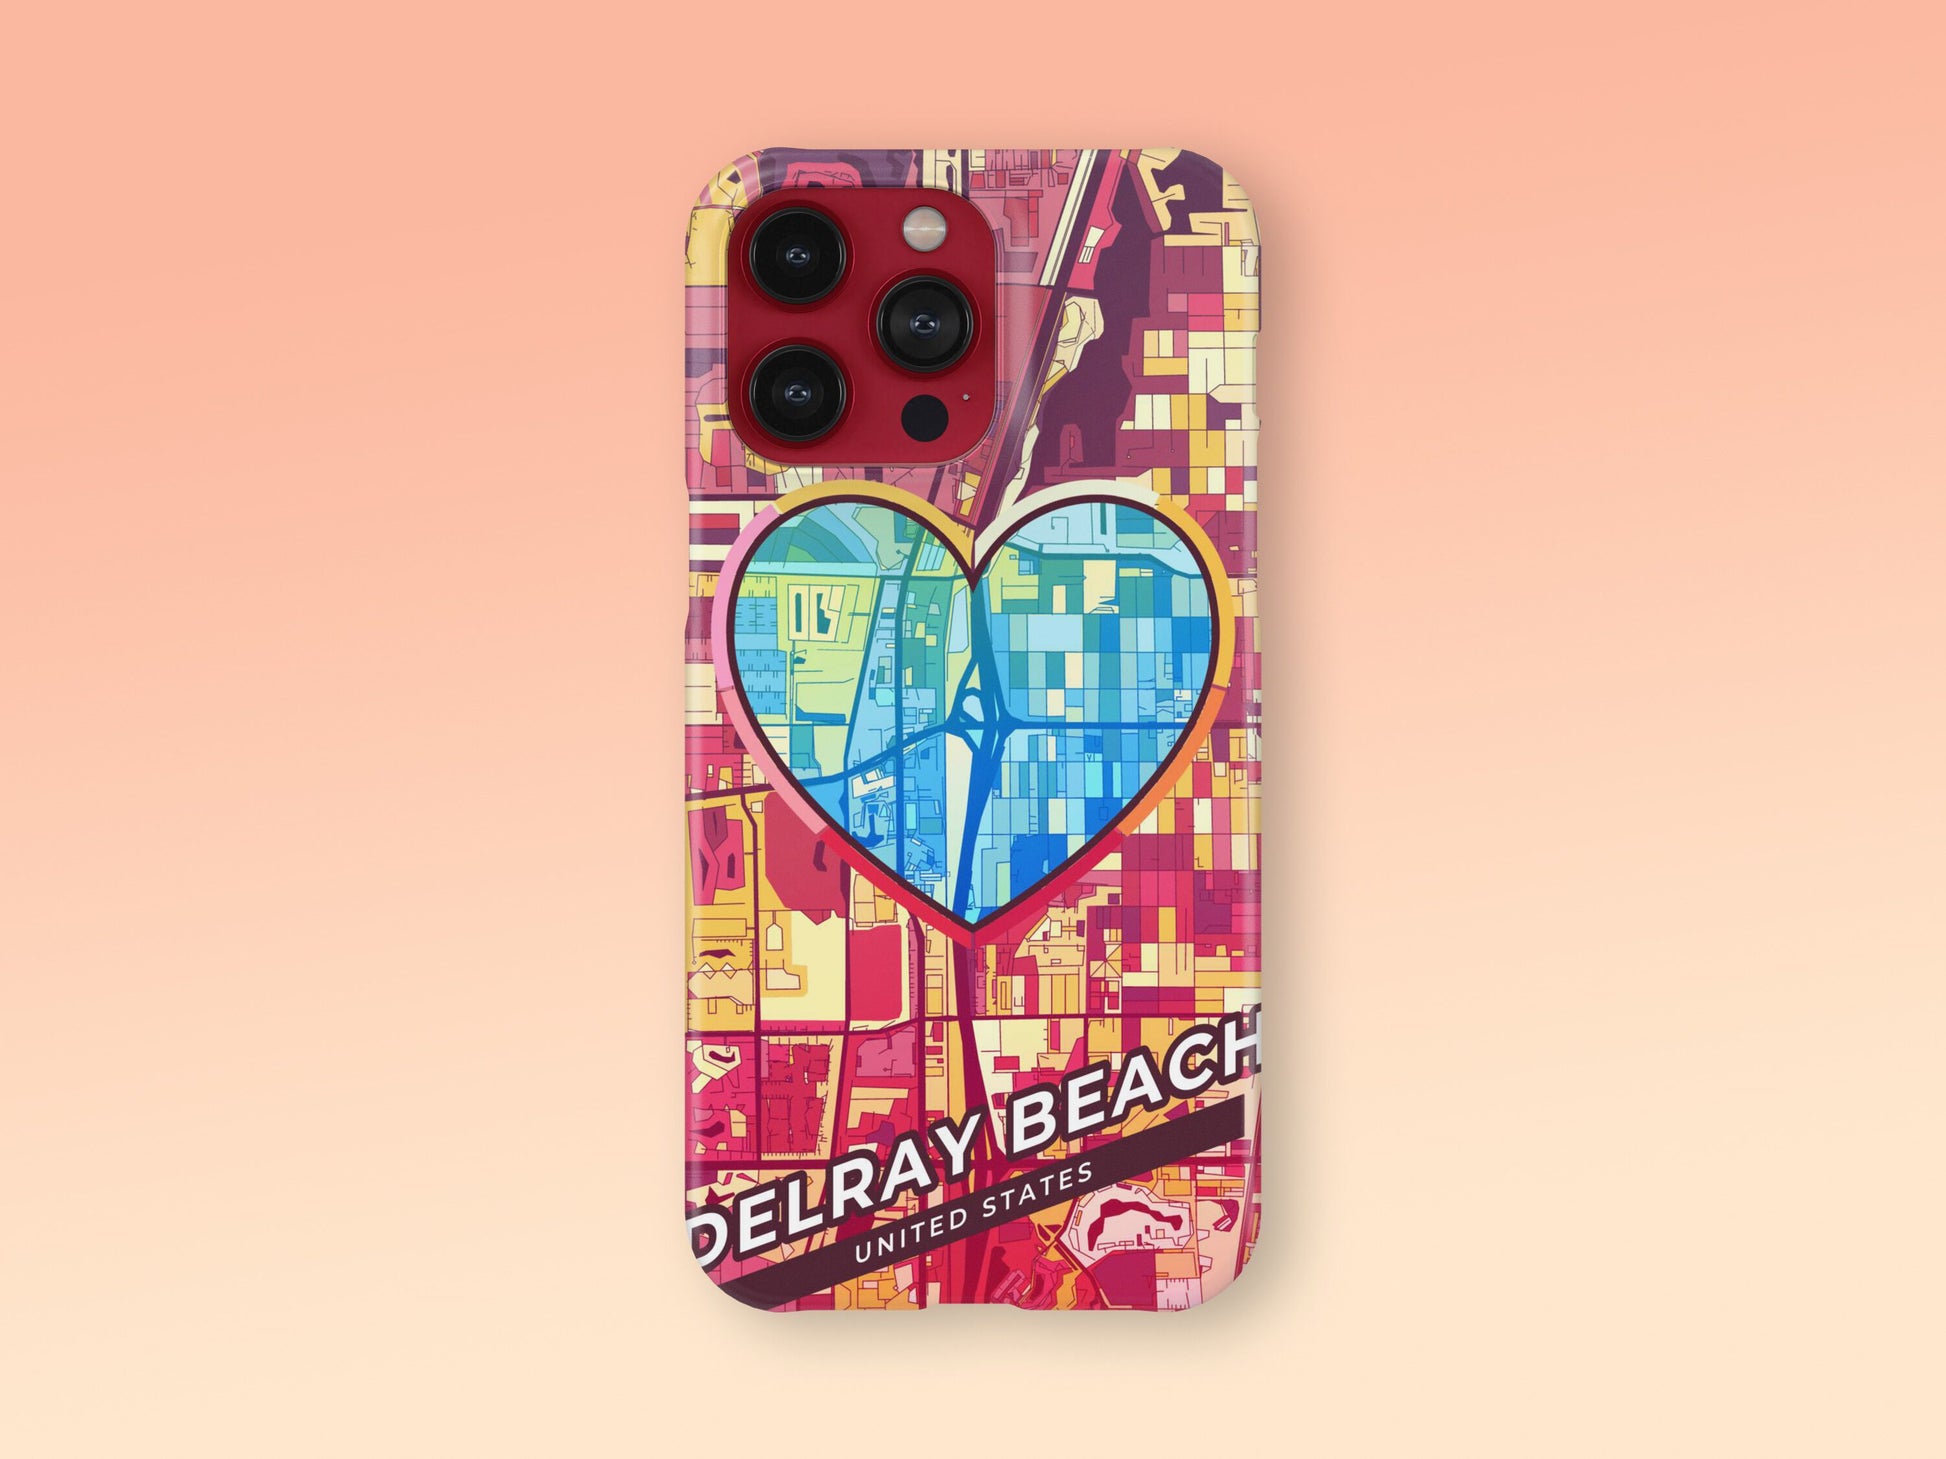 Delray Beach Florida slim phone case with colorful icon. Birthday, wedding or housewarming gift. Couple match cases. 2